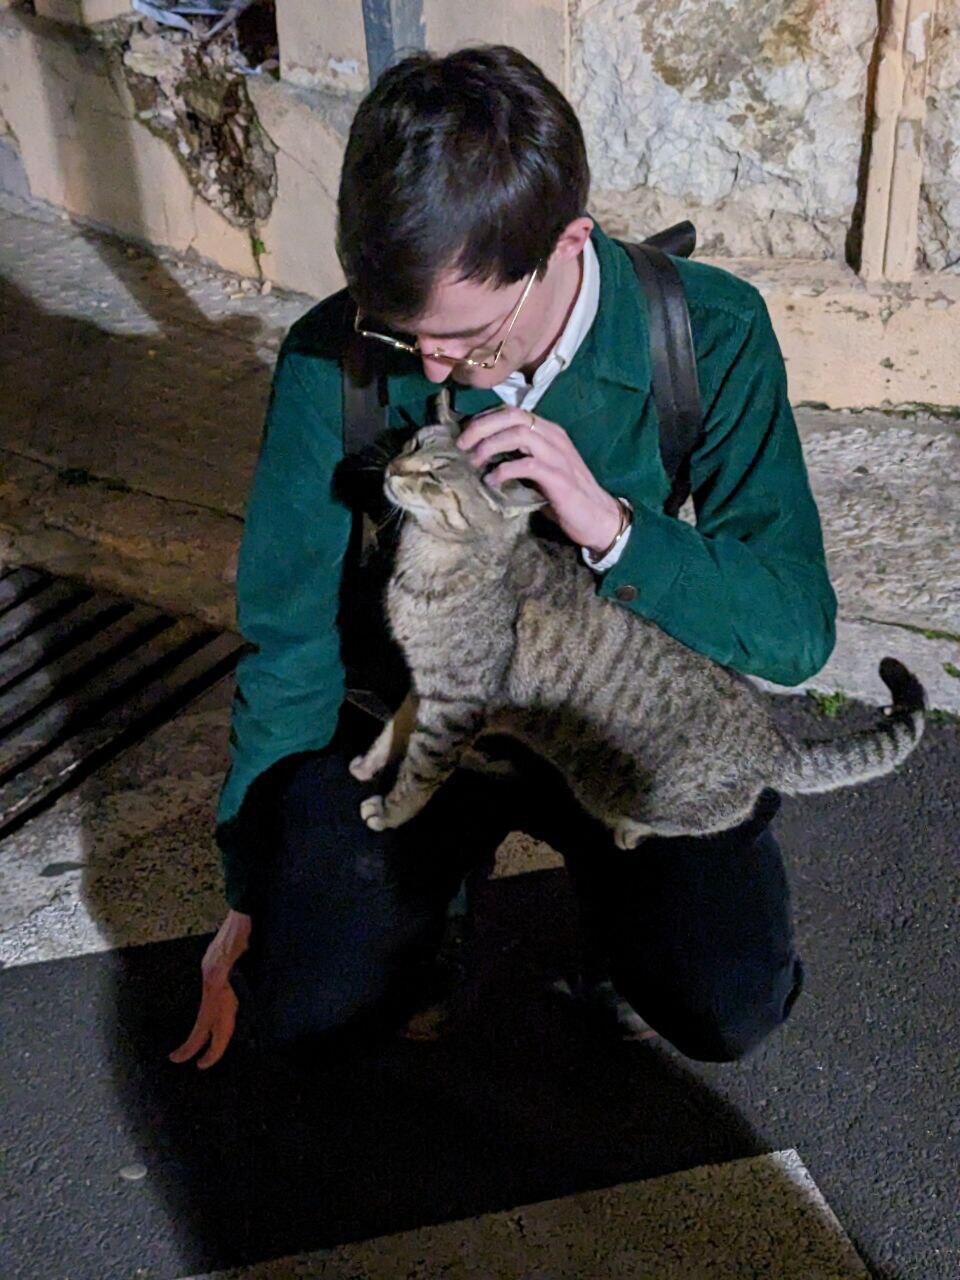 Me squatting in the streets of Pollença, Mallorca with a tabby cat which climbed on my legs and is enjoying the pets.